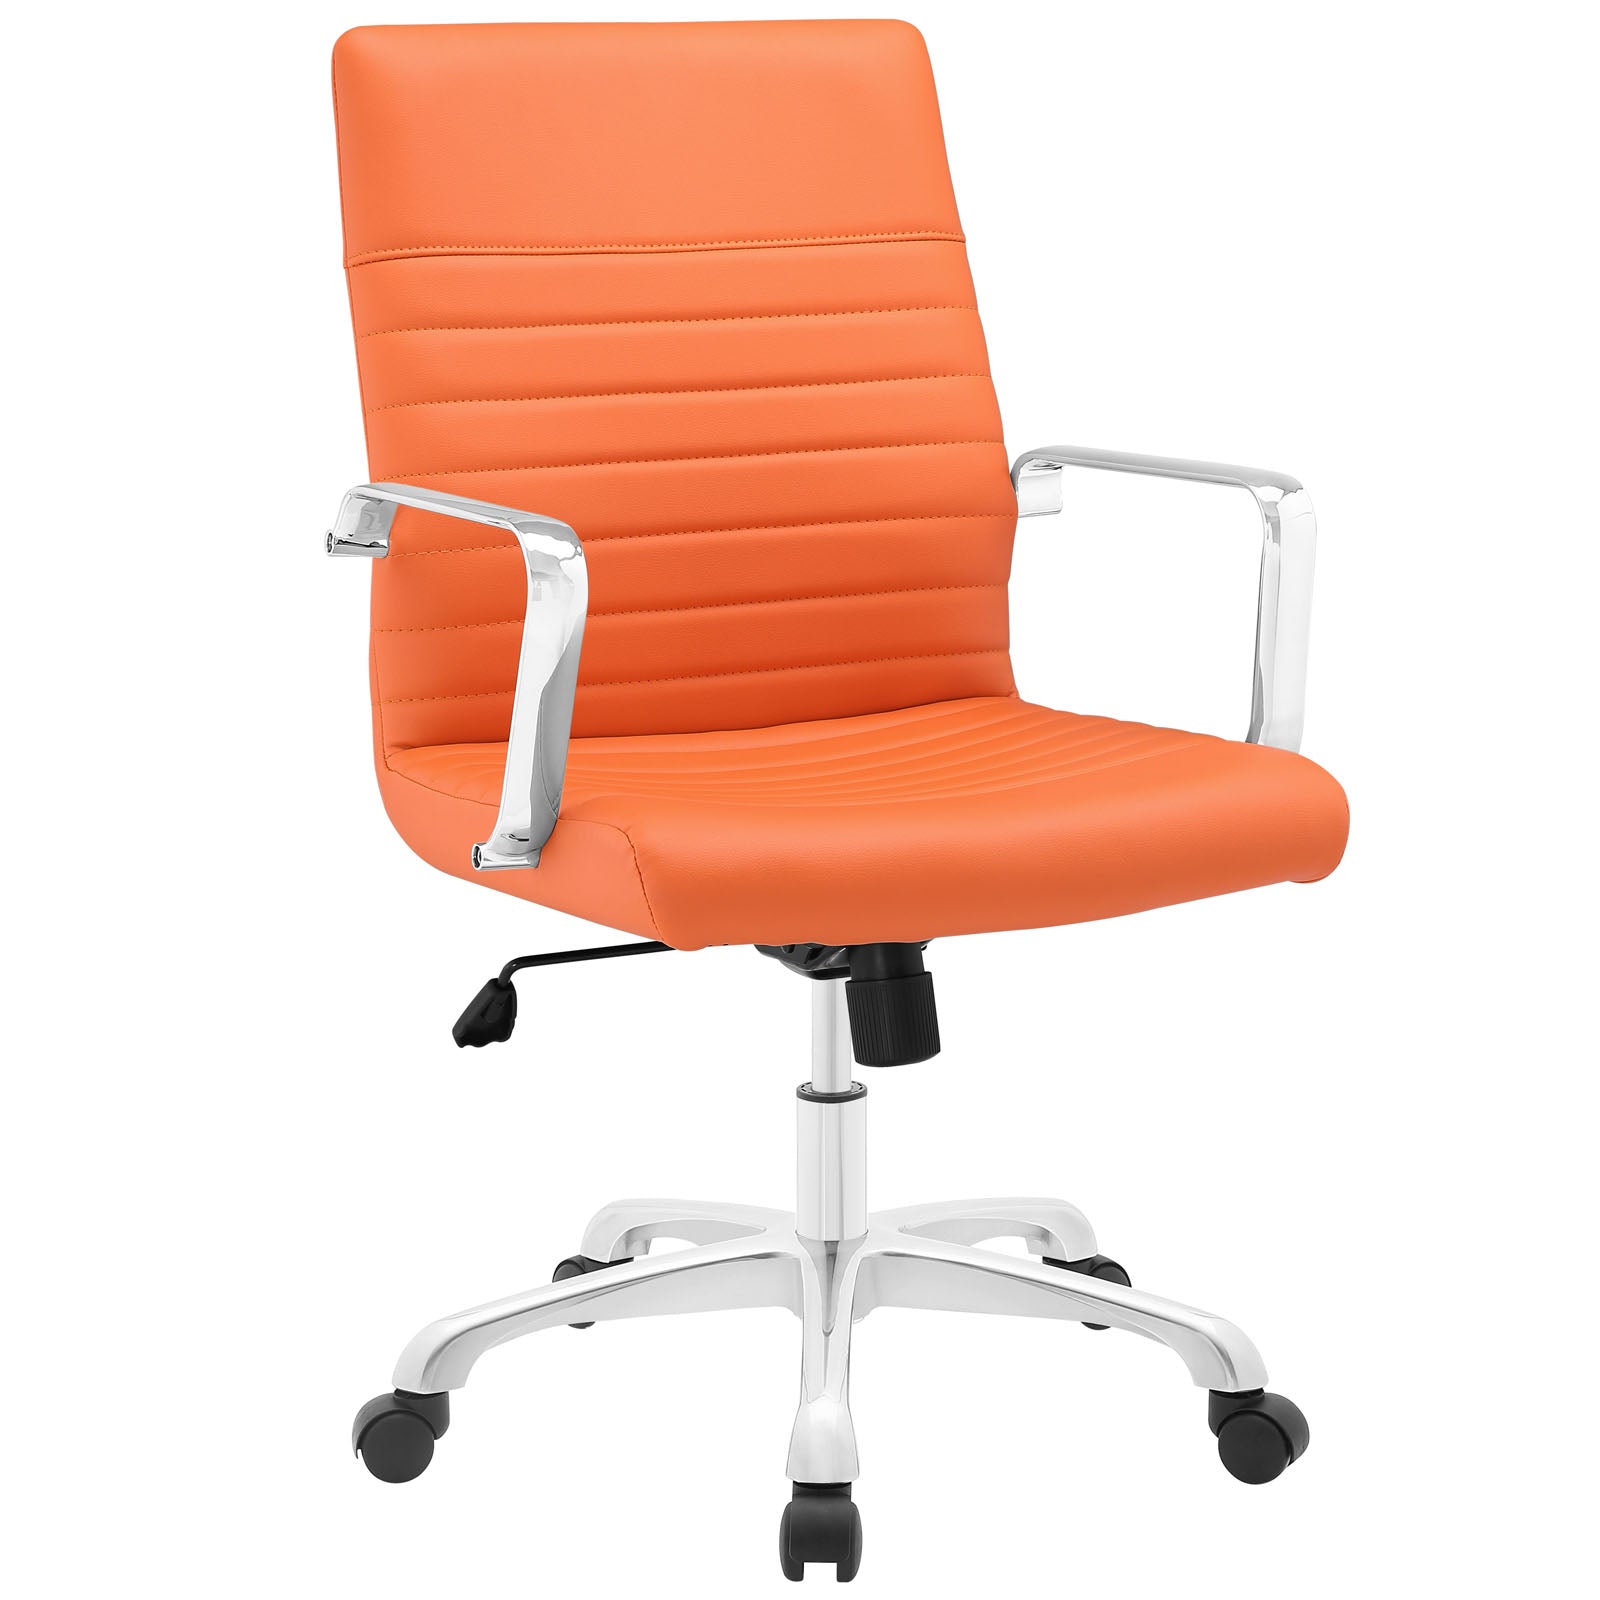 Finesse Mid Back Office Chair - East Shore Modern Home Furnishings